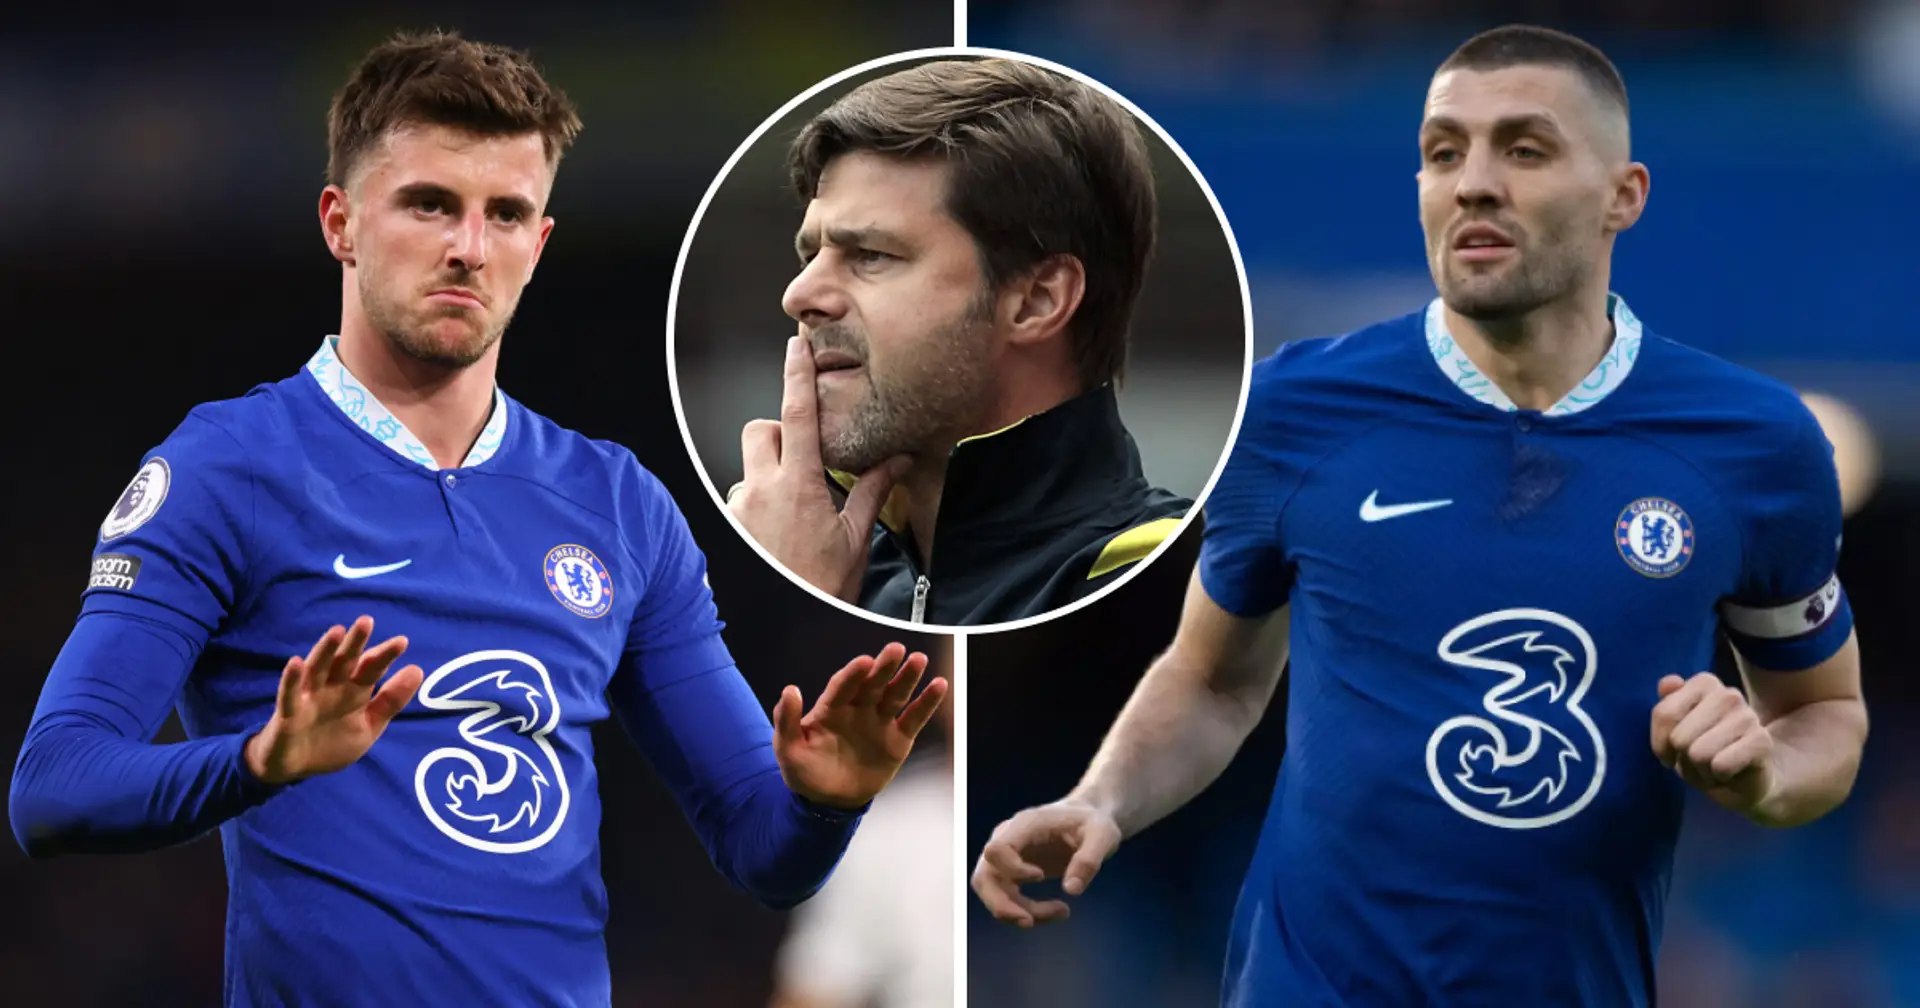 Chelsea fans want one player to replace Kovacic or Mount - he's literally free